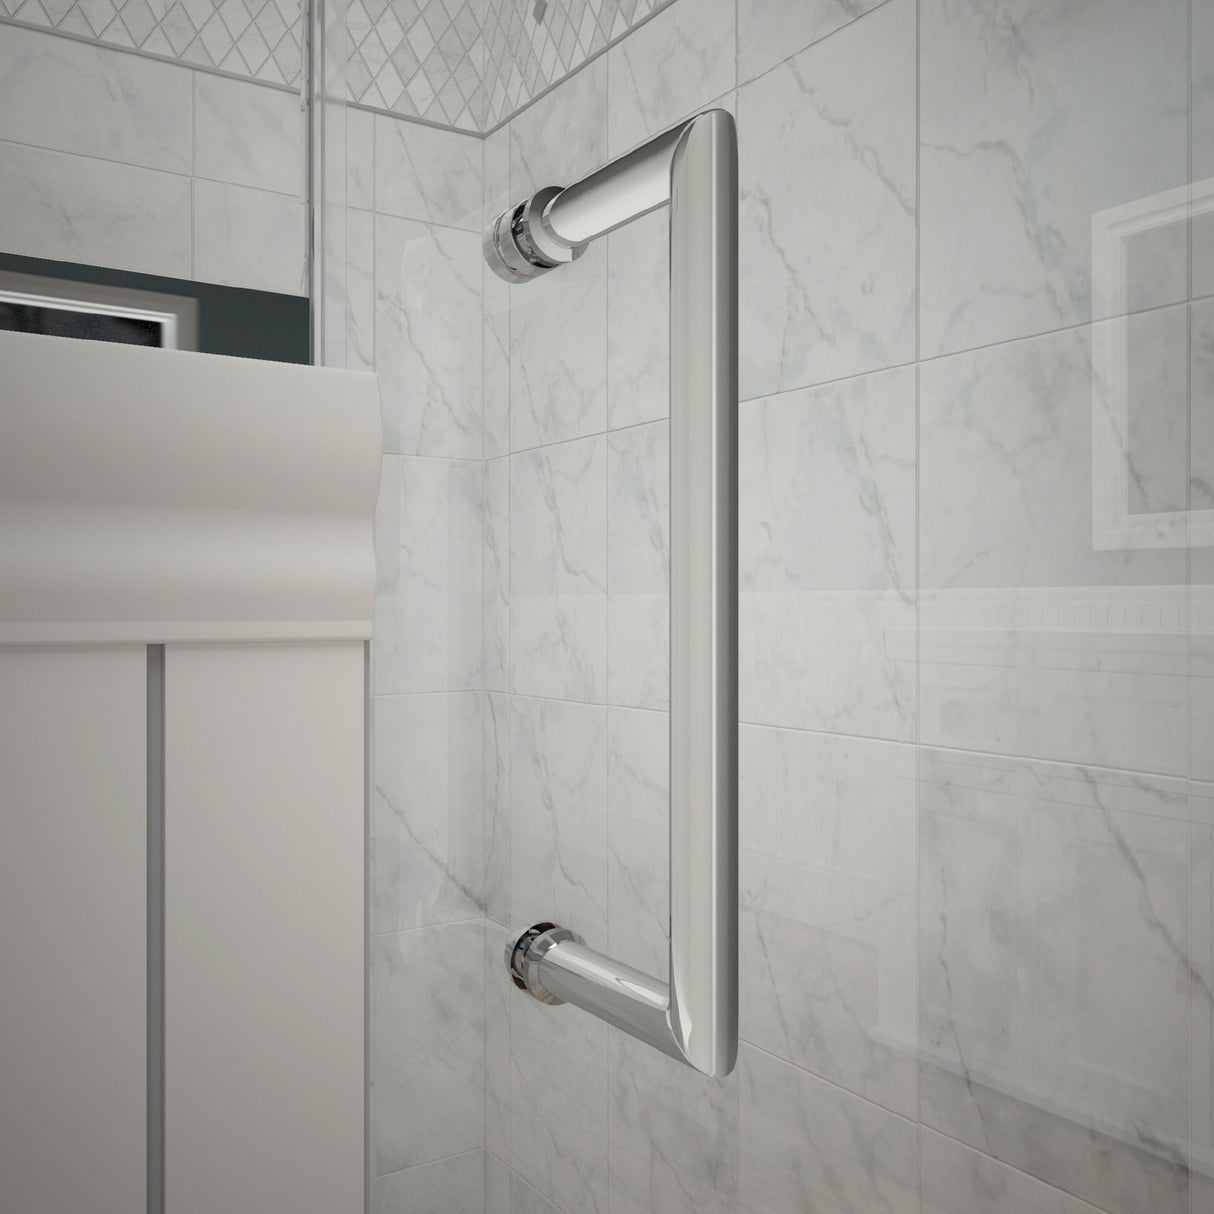 DreamLine Unidoor 43-44 in. W x 72 in. H Frameless Hinged Shower Door with Support Arm in Chrome